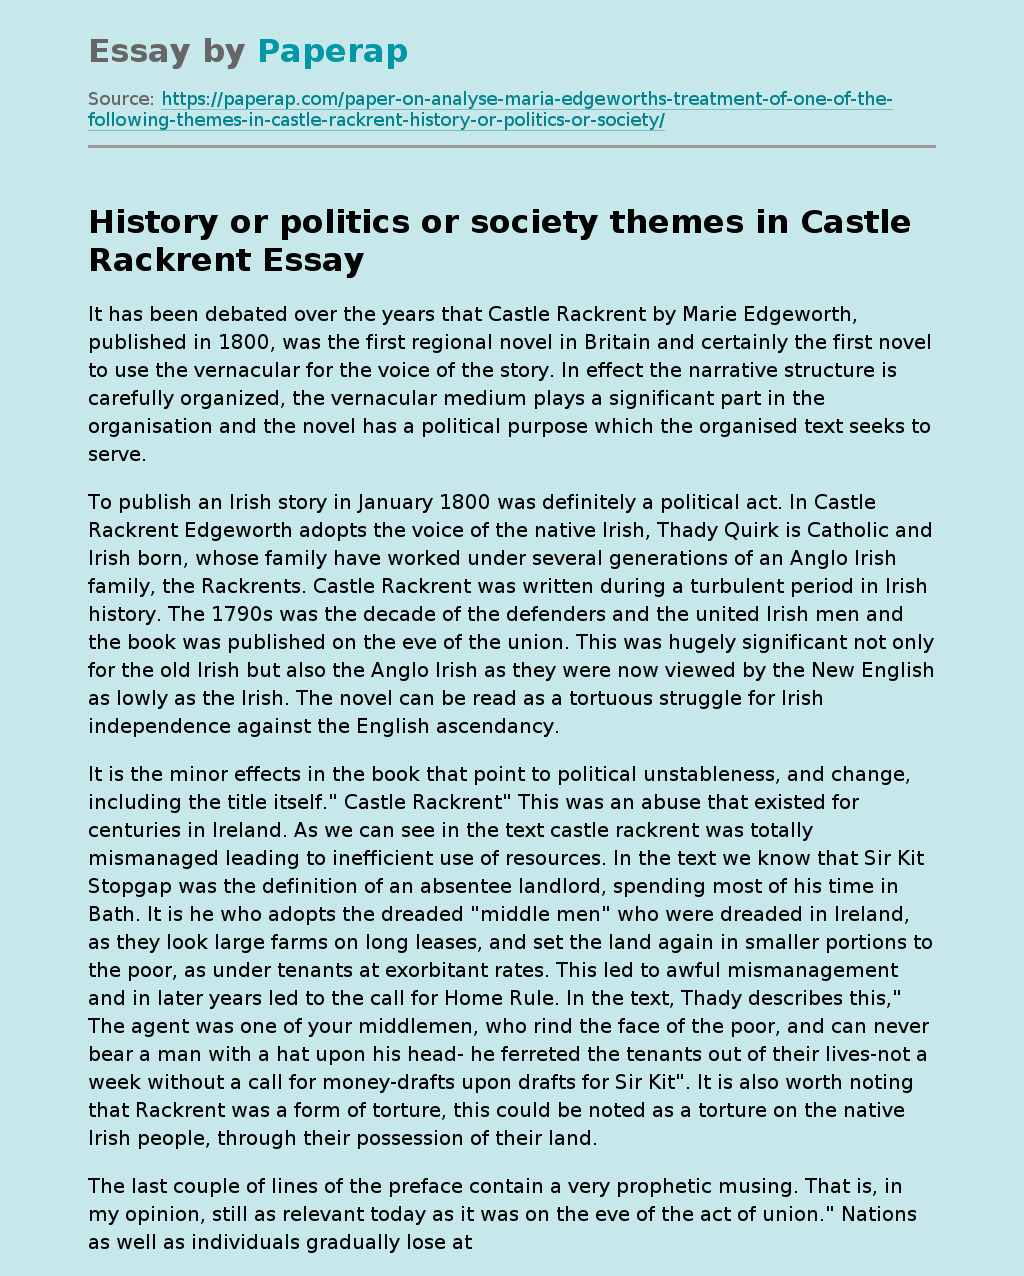 History or politics or society themes in Castle Rackrent